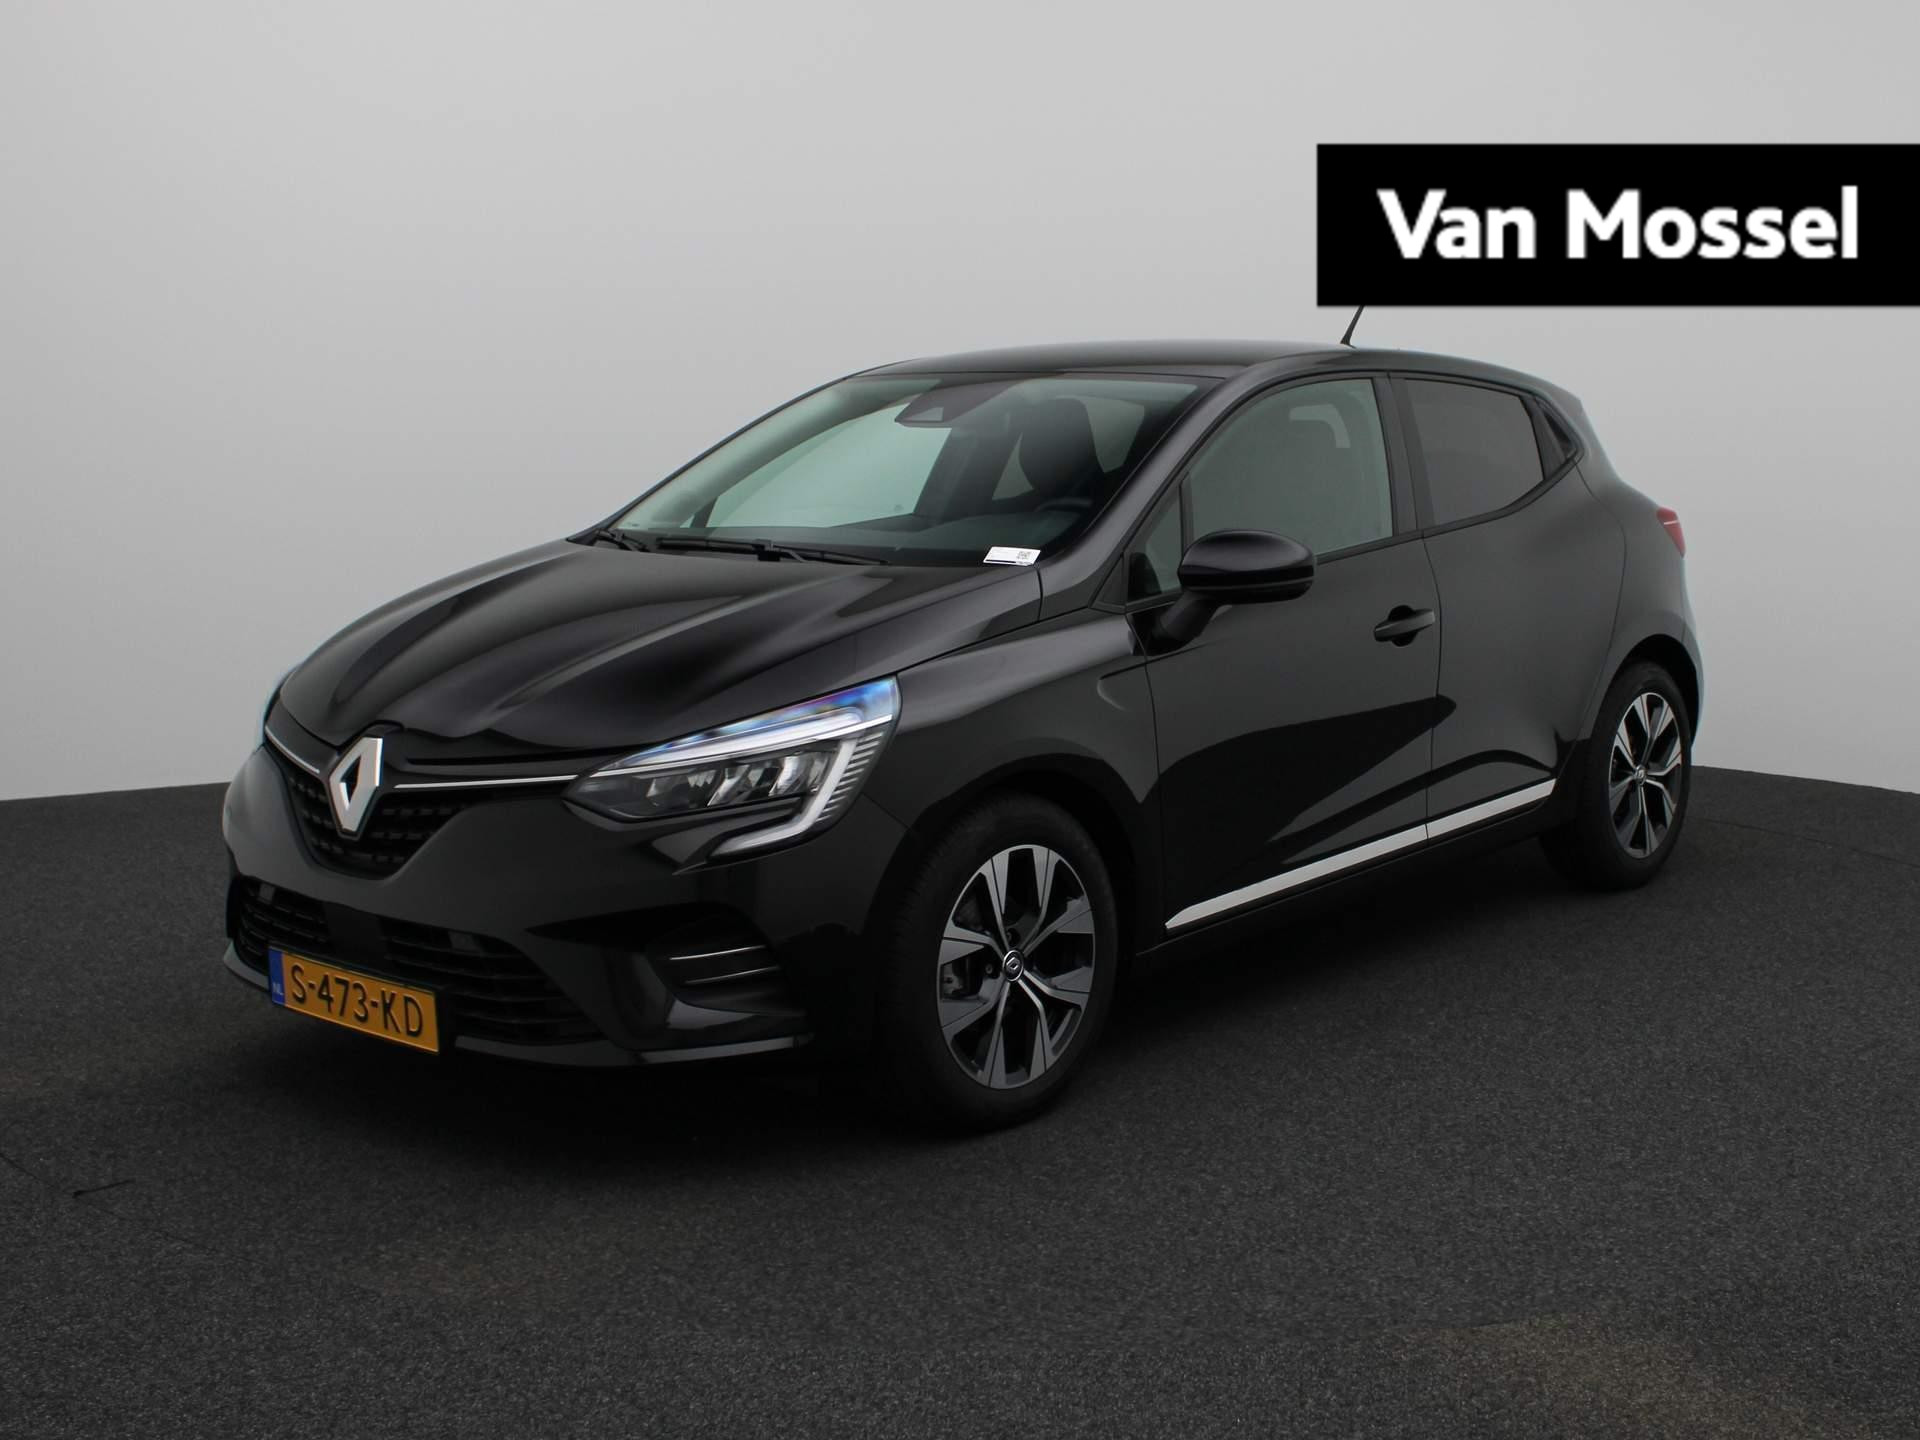 Renault Clio 1.0 TCe 90 Evolution | Navigatie | Apple & Android Carplay | Parkeersensoren Voor & Achter | Camera | Airco | Privacy Glass | Cruise Control |